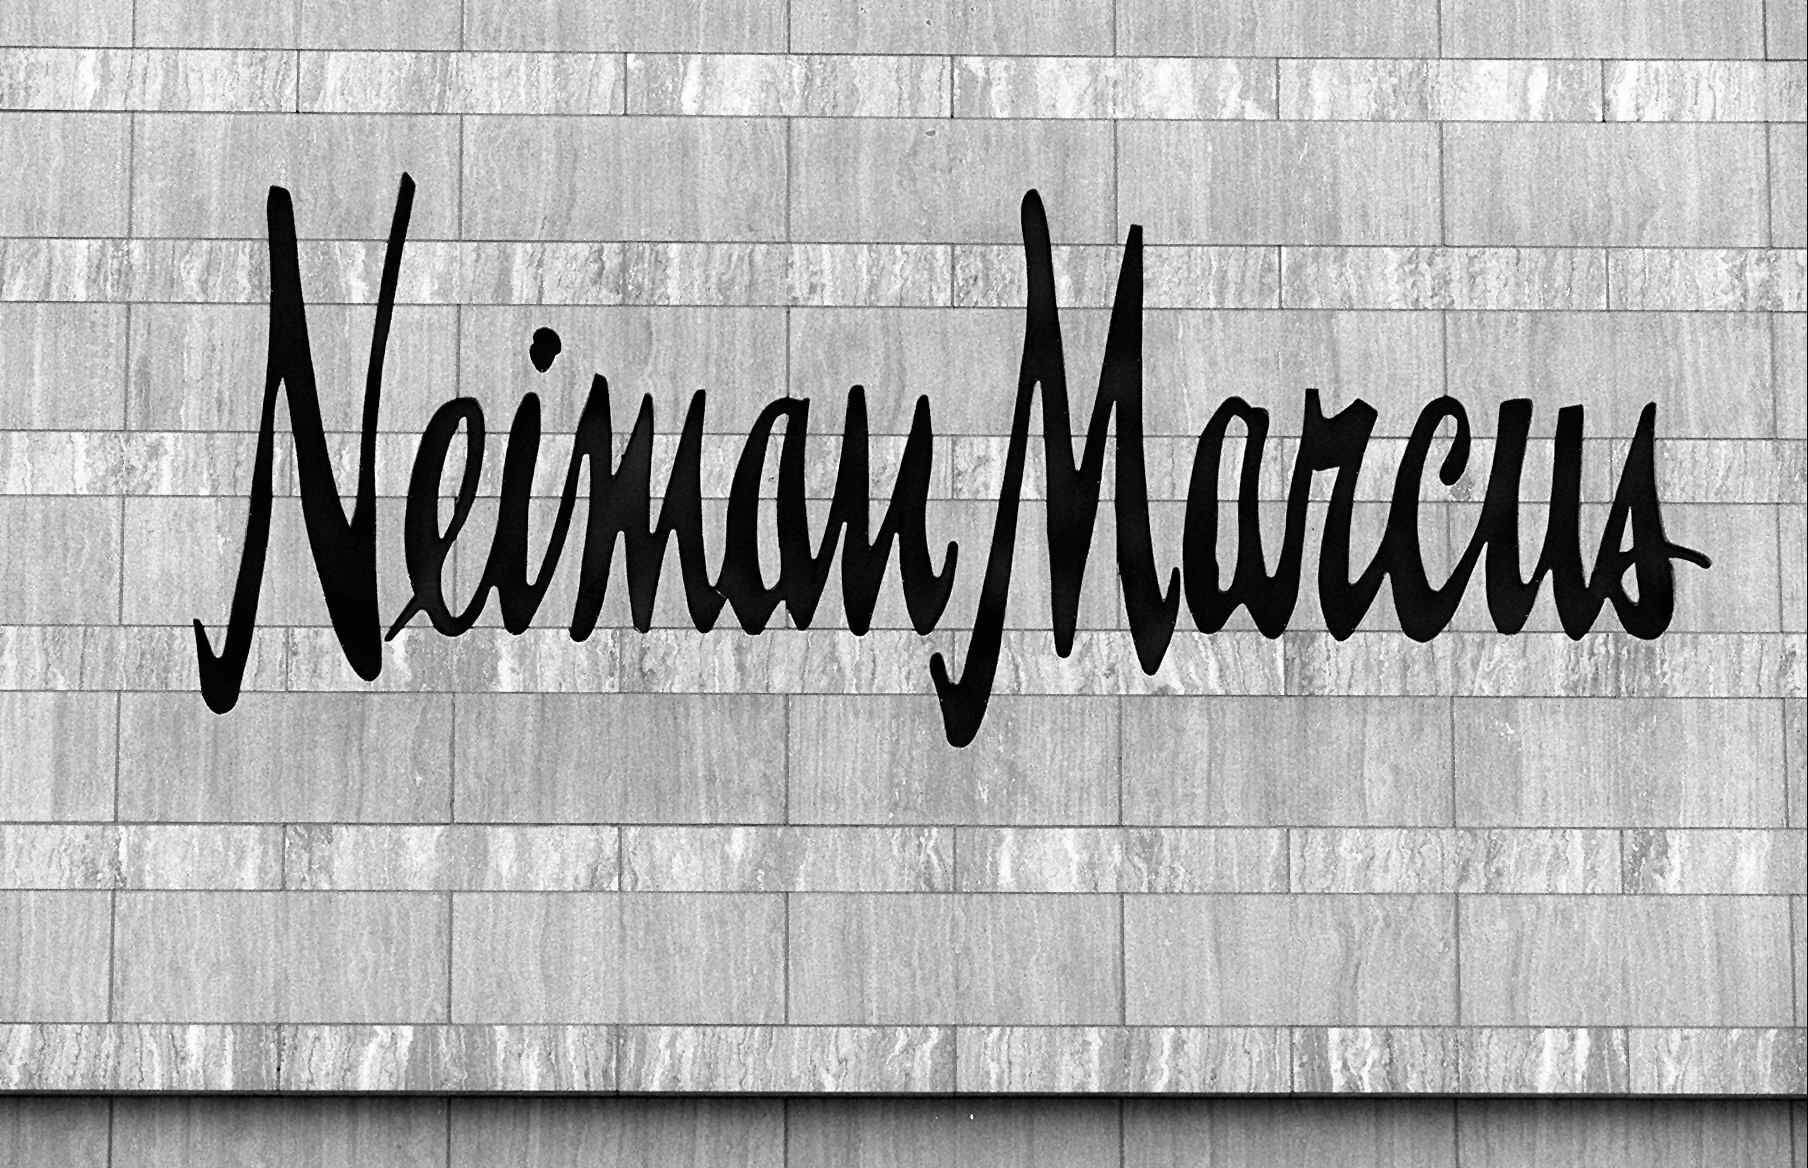 Neiman Marcus Closes 1 Of Its 2 Outlet Stores In N J Nj Com